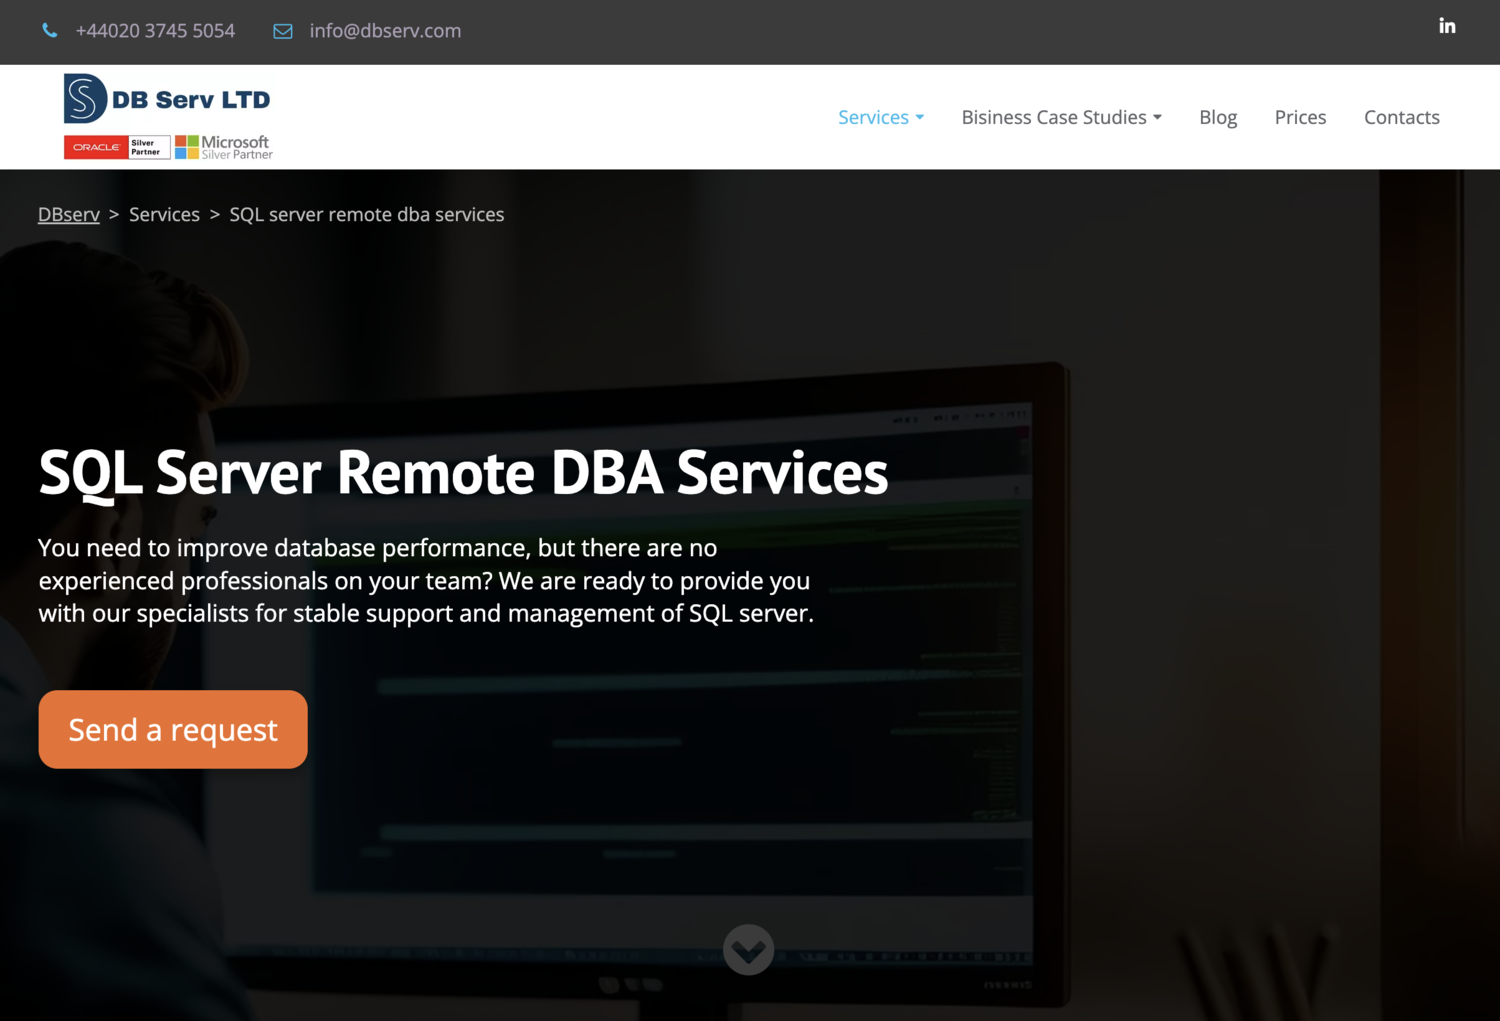 444020 3745 5054 info@dbserv.com

DB Serv LTD

 

DBsery &gt; Services &gt; SQL server remote dba services

SOL Server Remote DBA Services

You need to improve database performance, but there are no
experienced professionals on your team? We are ready to provide you
with our specialists for stable support and management of SQL server.